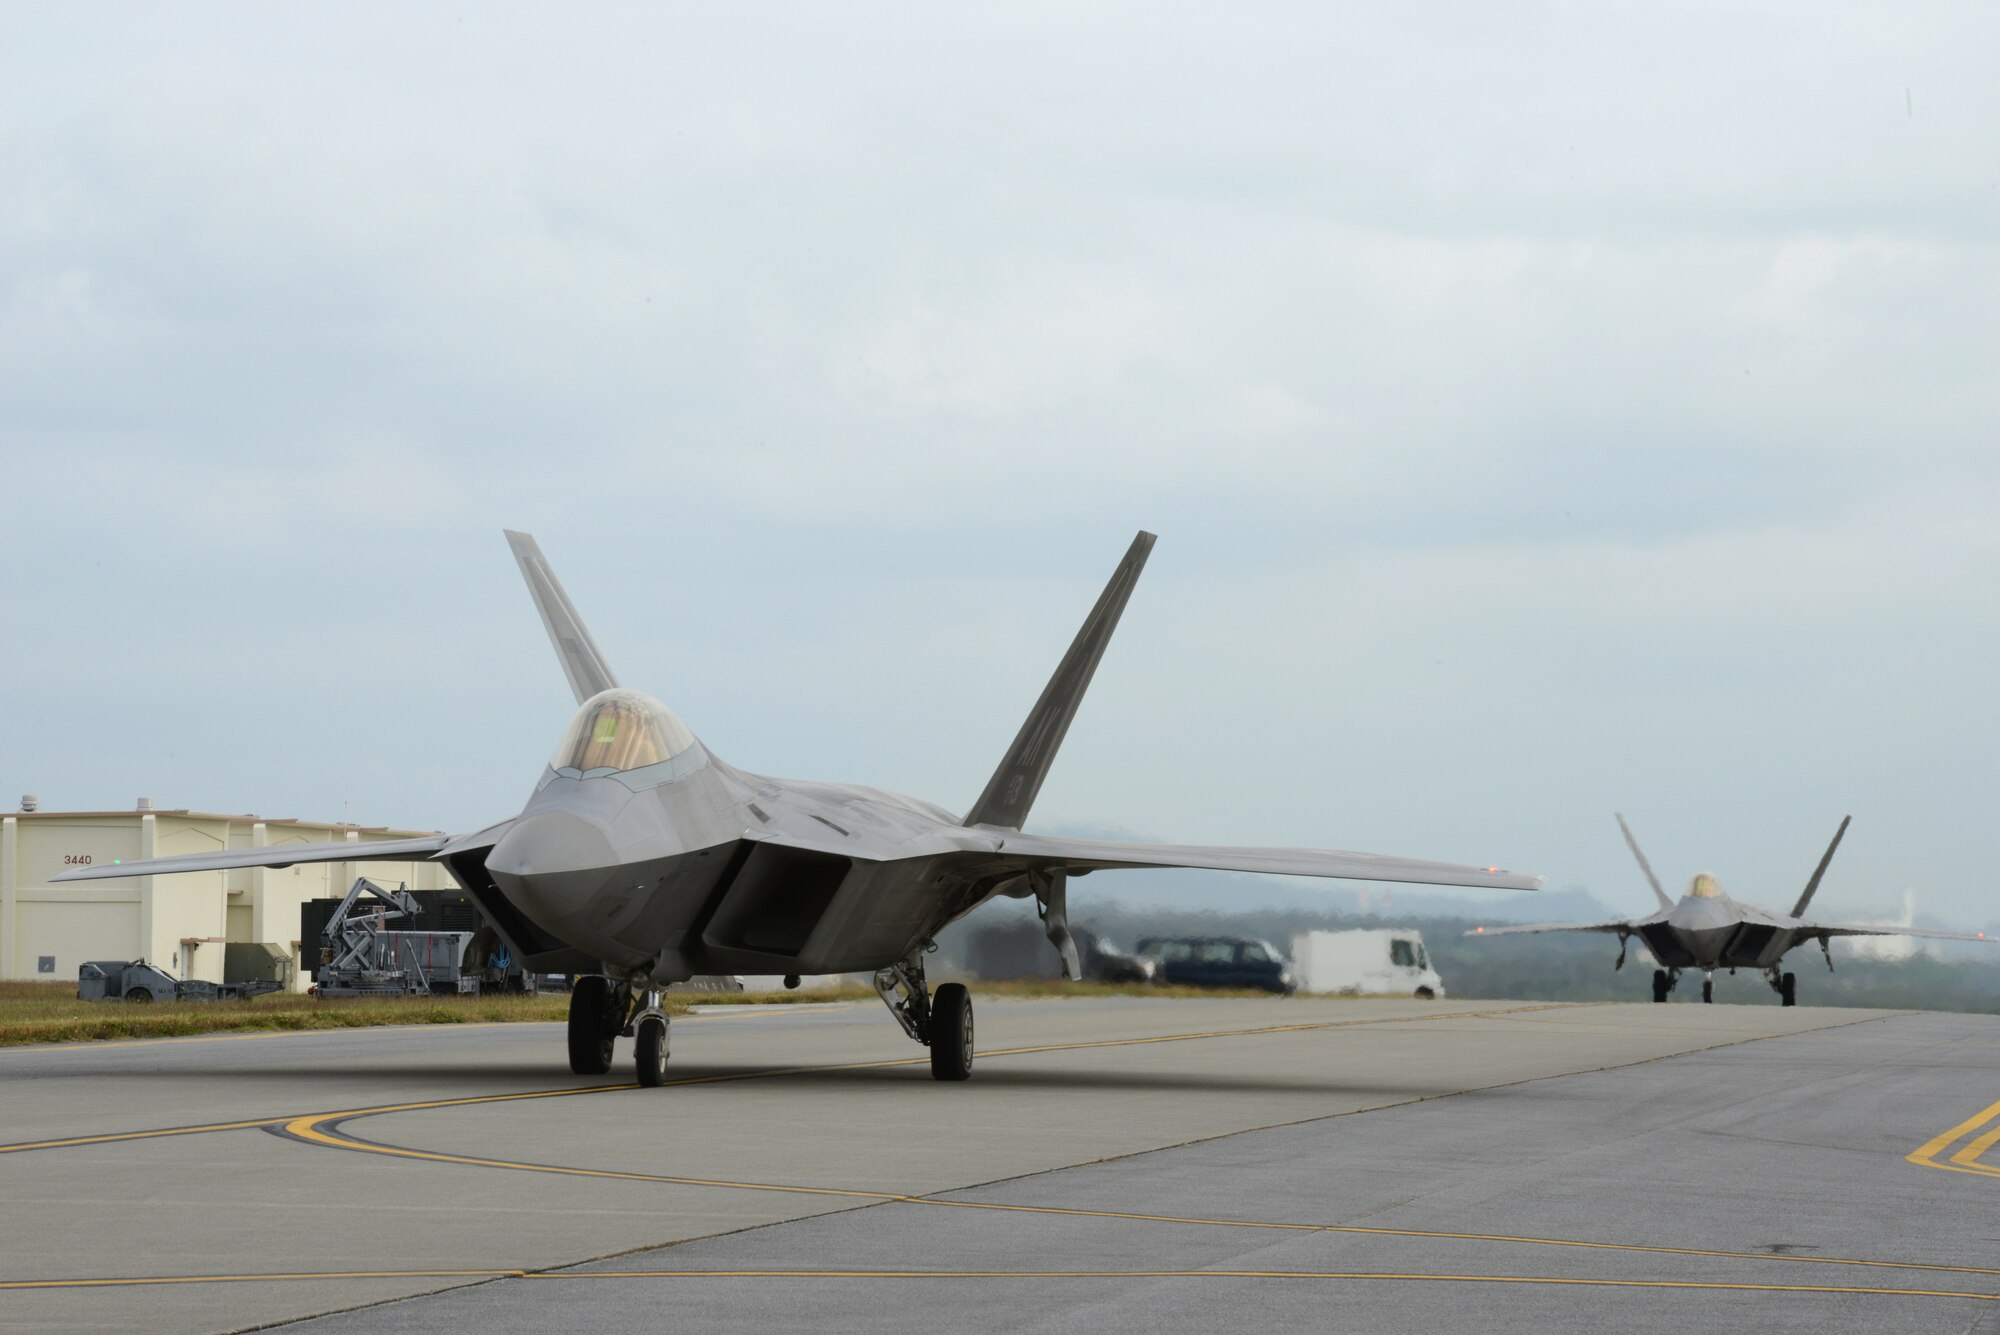 Two U.S. Air Force F-22 Raptors from the 525th Fighter Squadron stationed at Joint Base Elmendorf-Richardson, Alaska, taxi on the Kadena Air Base, Japan, flight line before takeoff Nov. 14, 2014. The Raptors, which are temporarily operating out of Kadena, are participating in Keen Sword 2015, a joint bilateral field training exercise involving U.S. military and Japan Self-Defense Force personnel. Keen Sword is designed to increase combat readiness and interoperability between the JSDF and U.S. forces and will be conducted at multiple venues in the Japan area of responsibility. (U.S. Air Force photo by Senior Airman Maeson L. Elleman/Released)